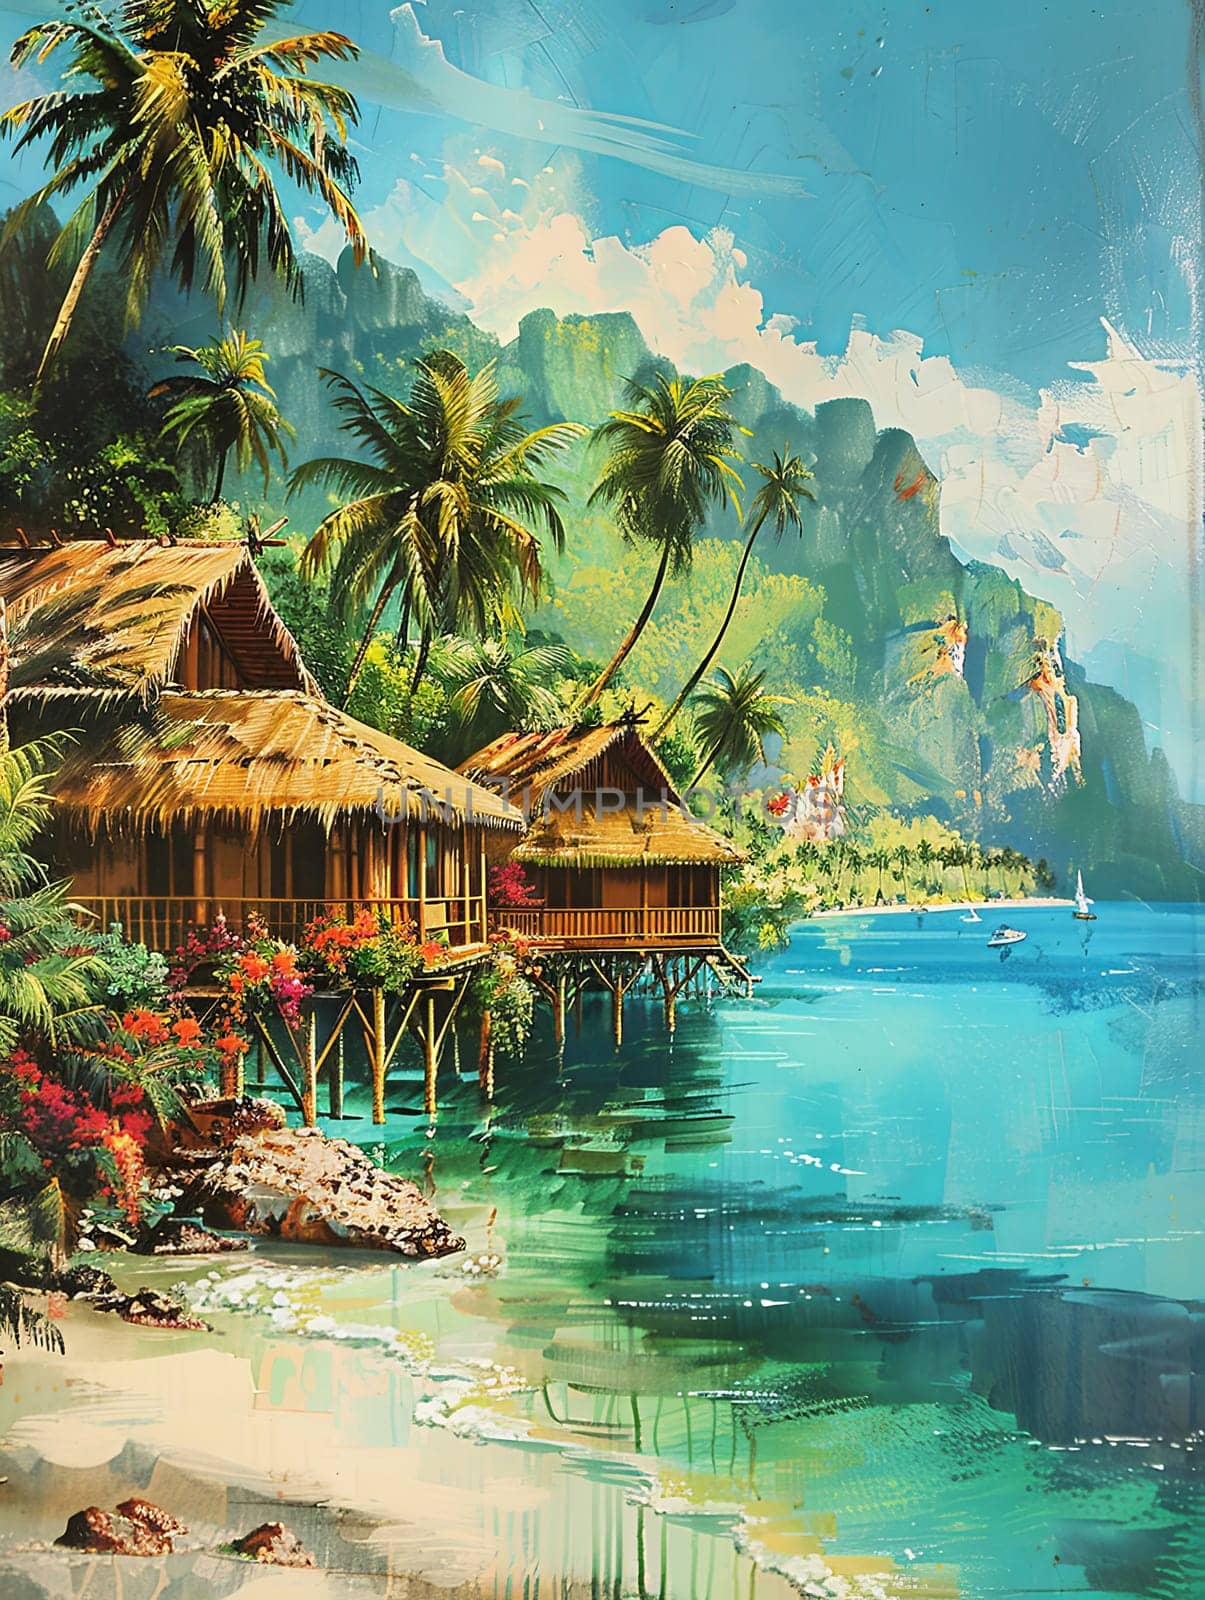 A painting depicting a tropical island with lush palm trees swaying in the breeze.